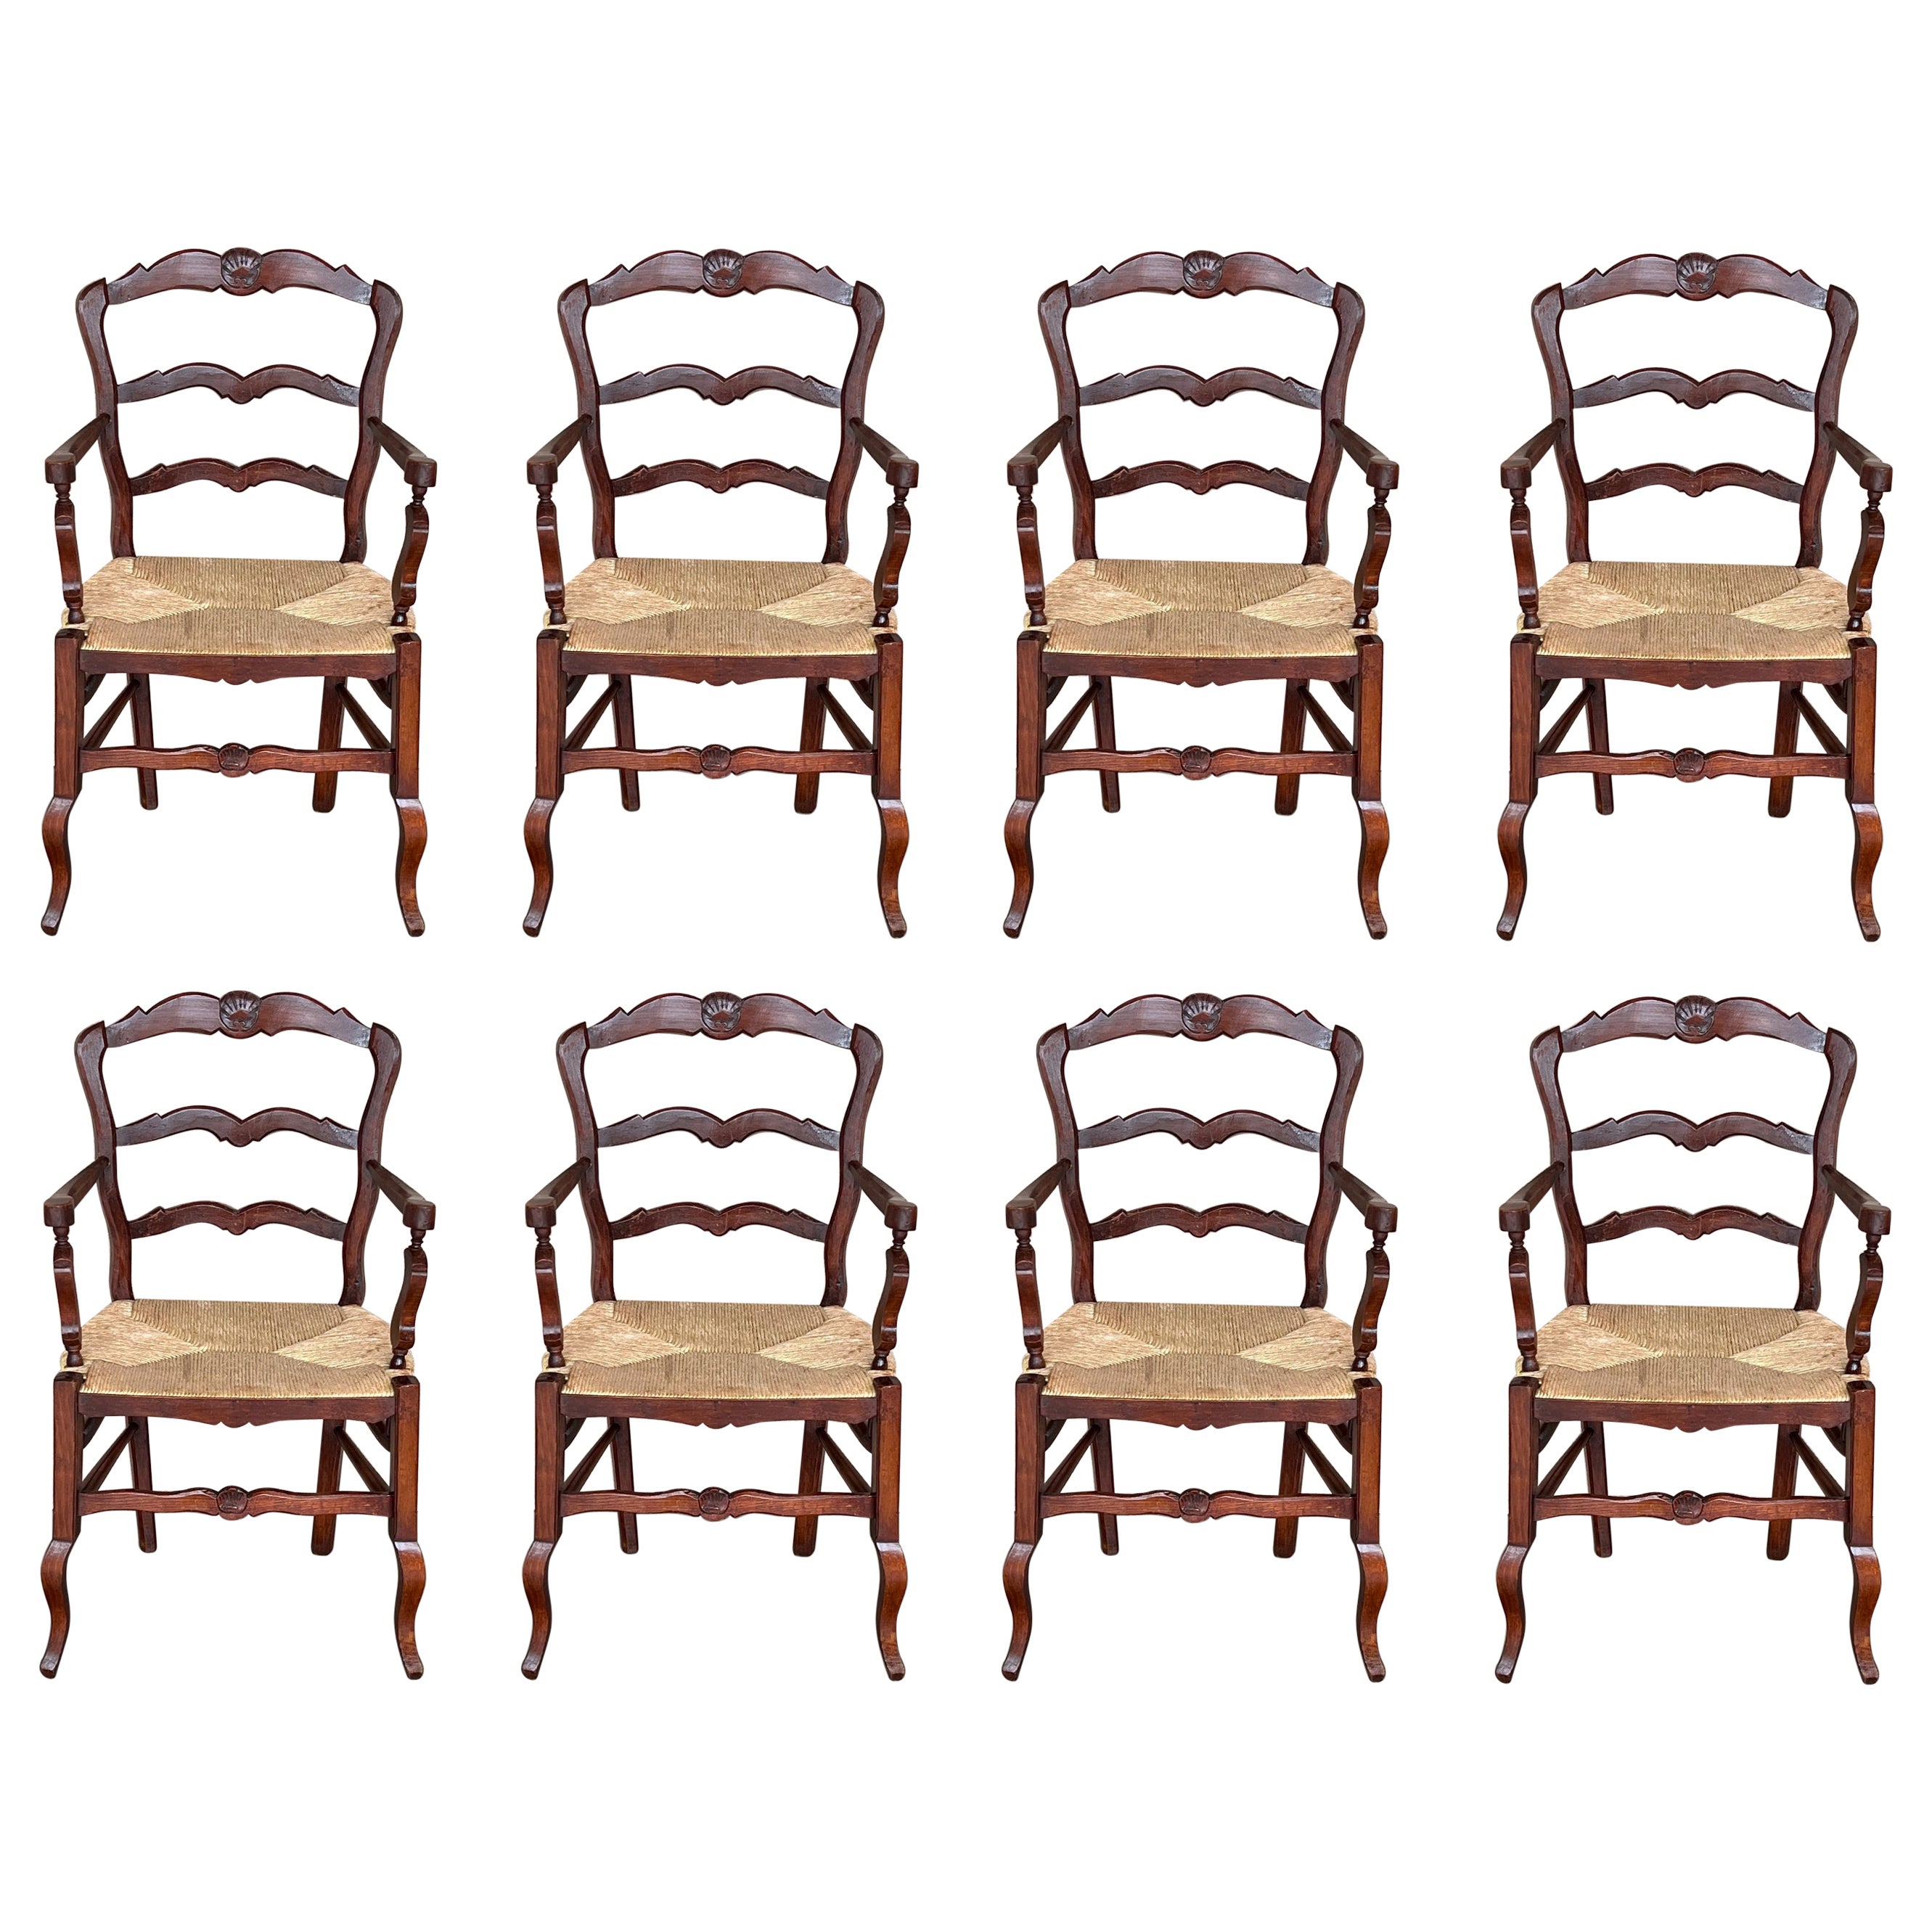 19th Set of Eight Spanish Armchairs with Cane Seat